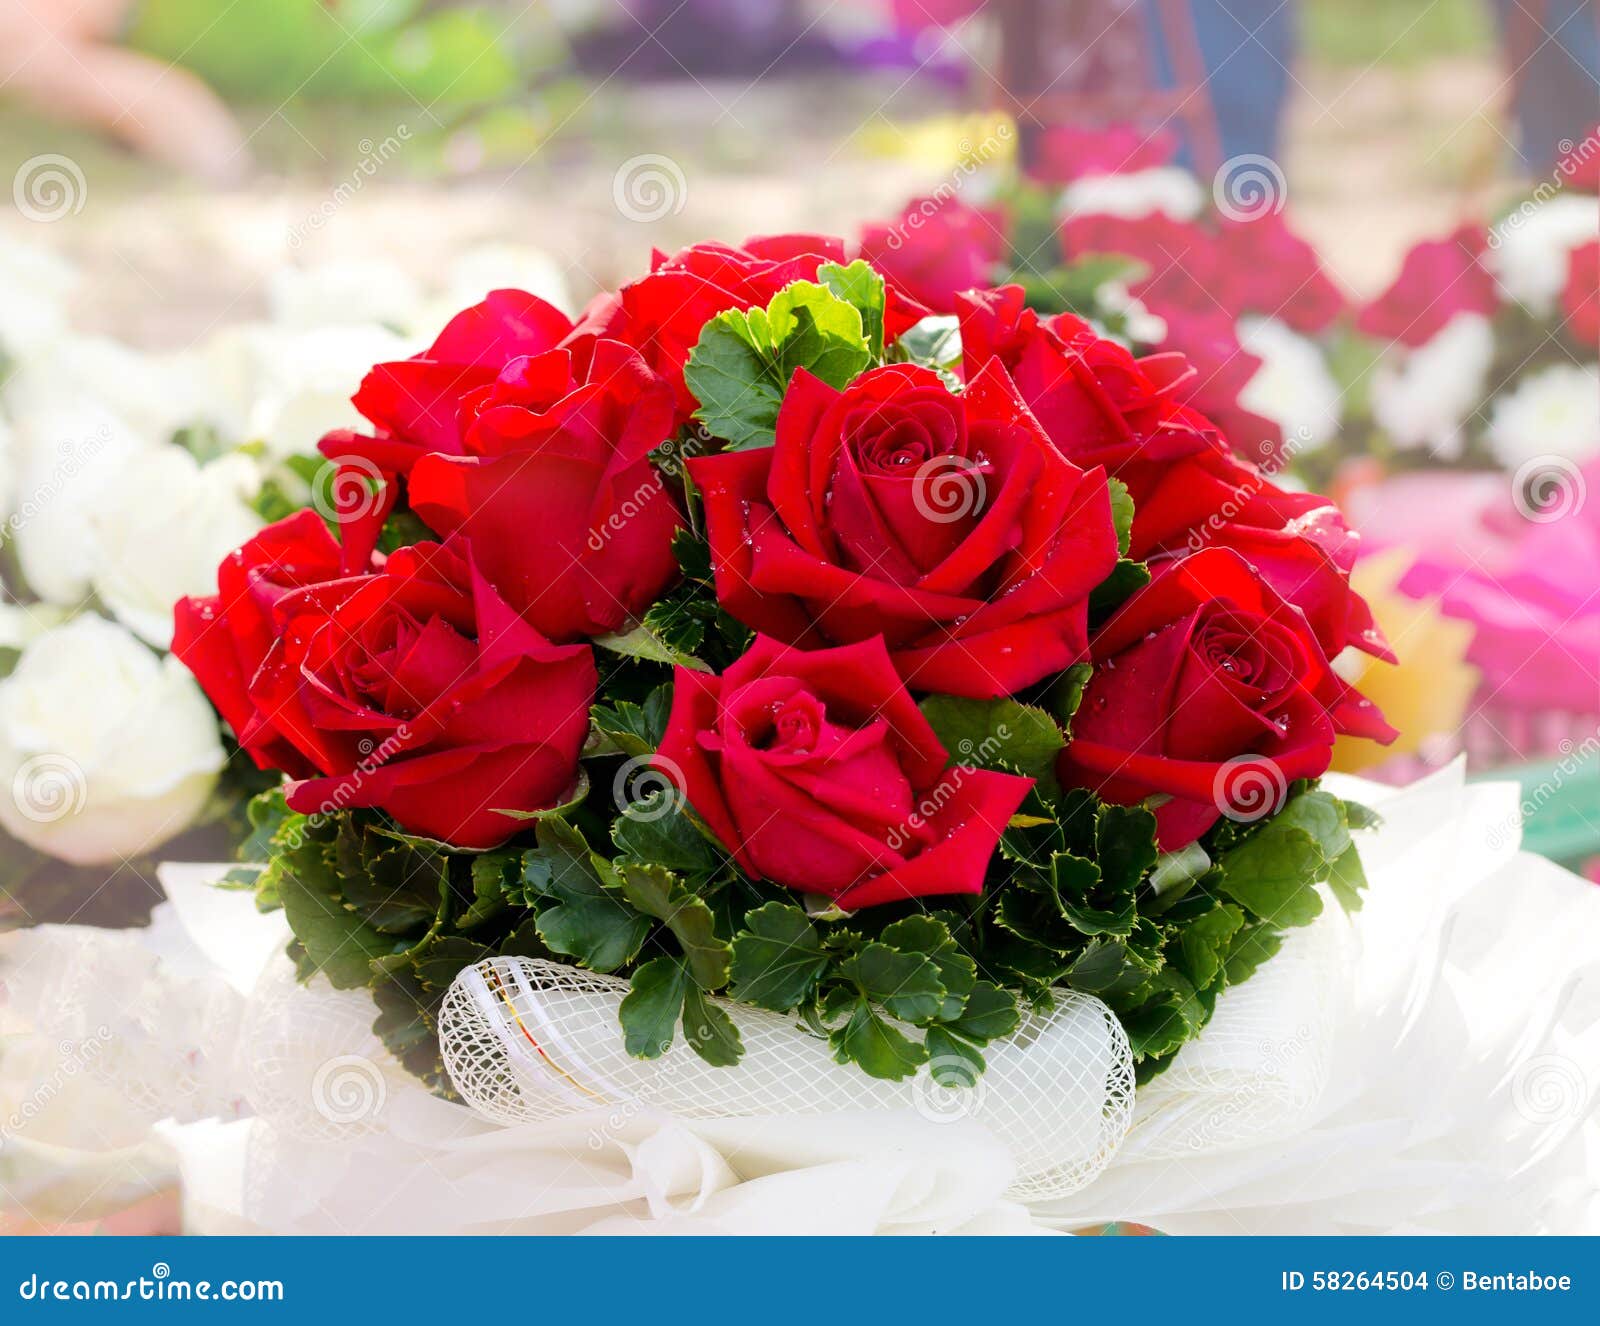 Beautiful Red Roses Bouquet Stock Photo Image 58264504